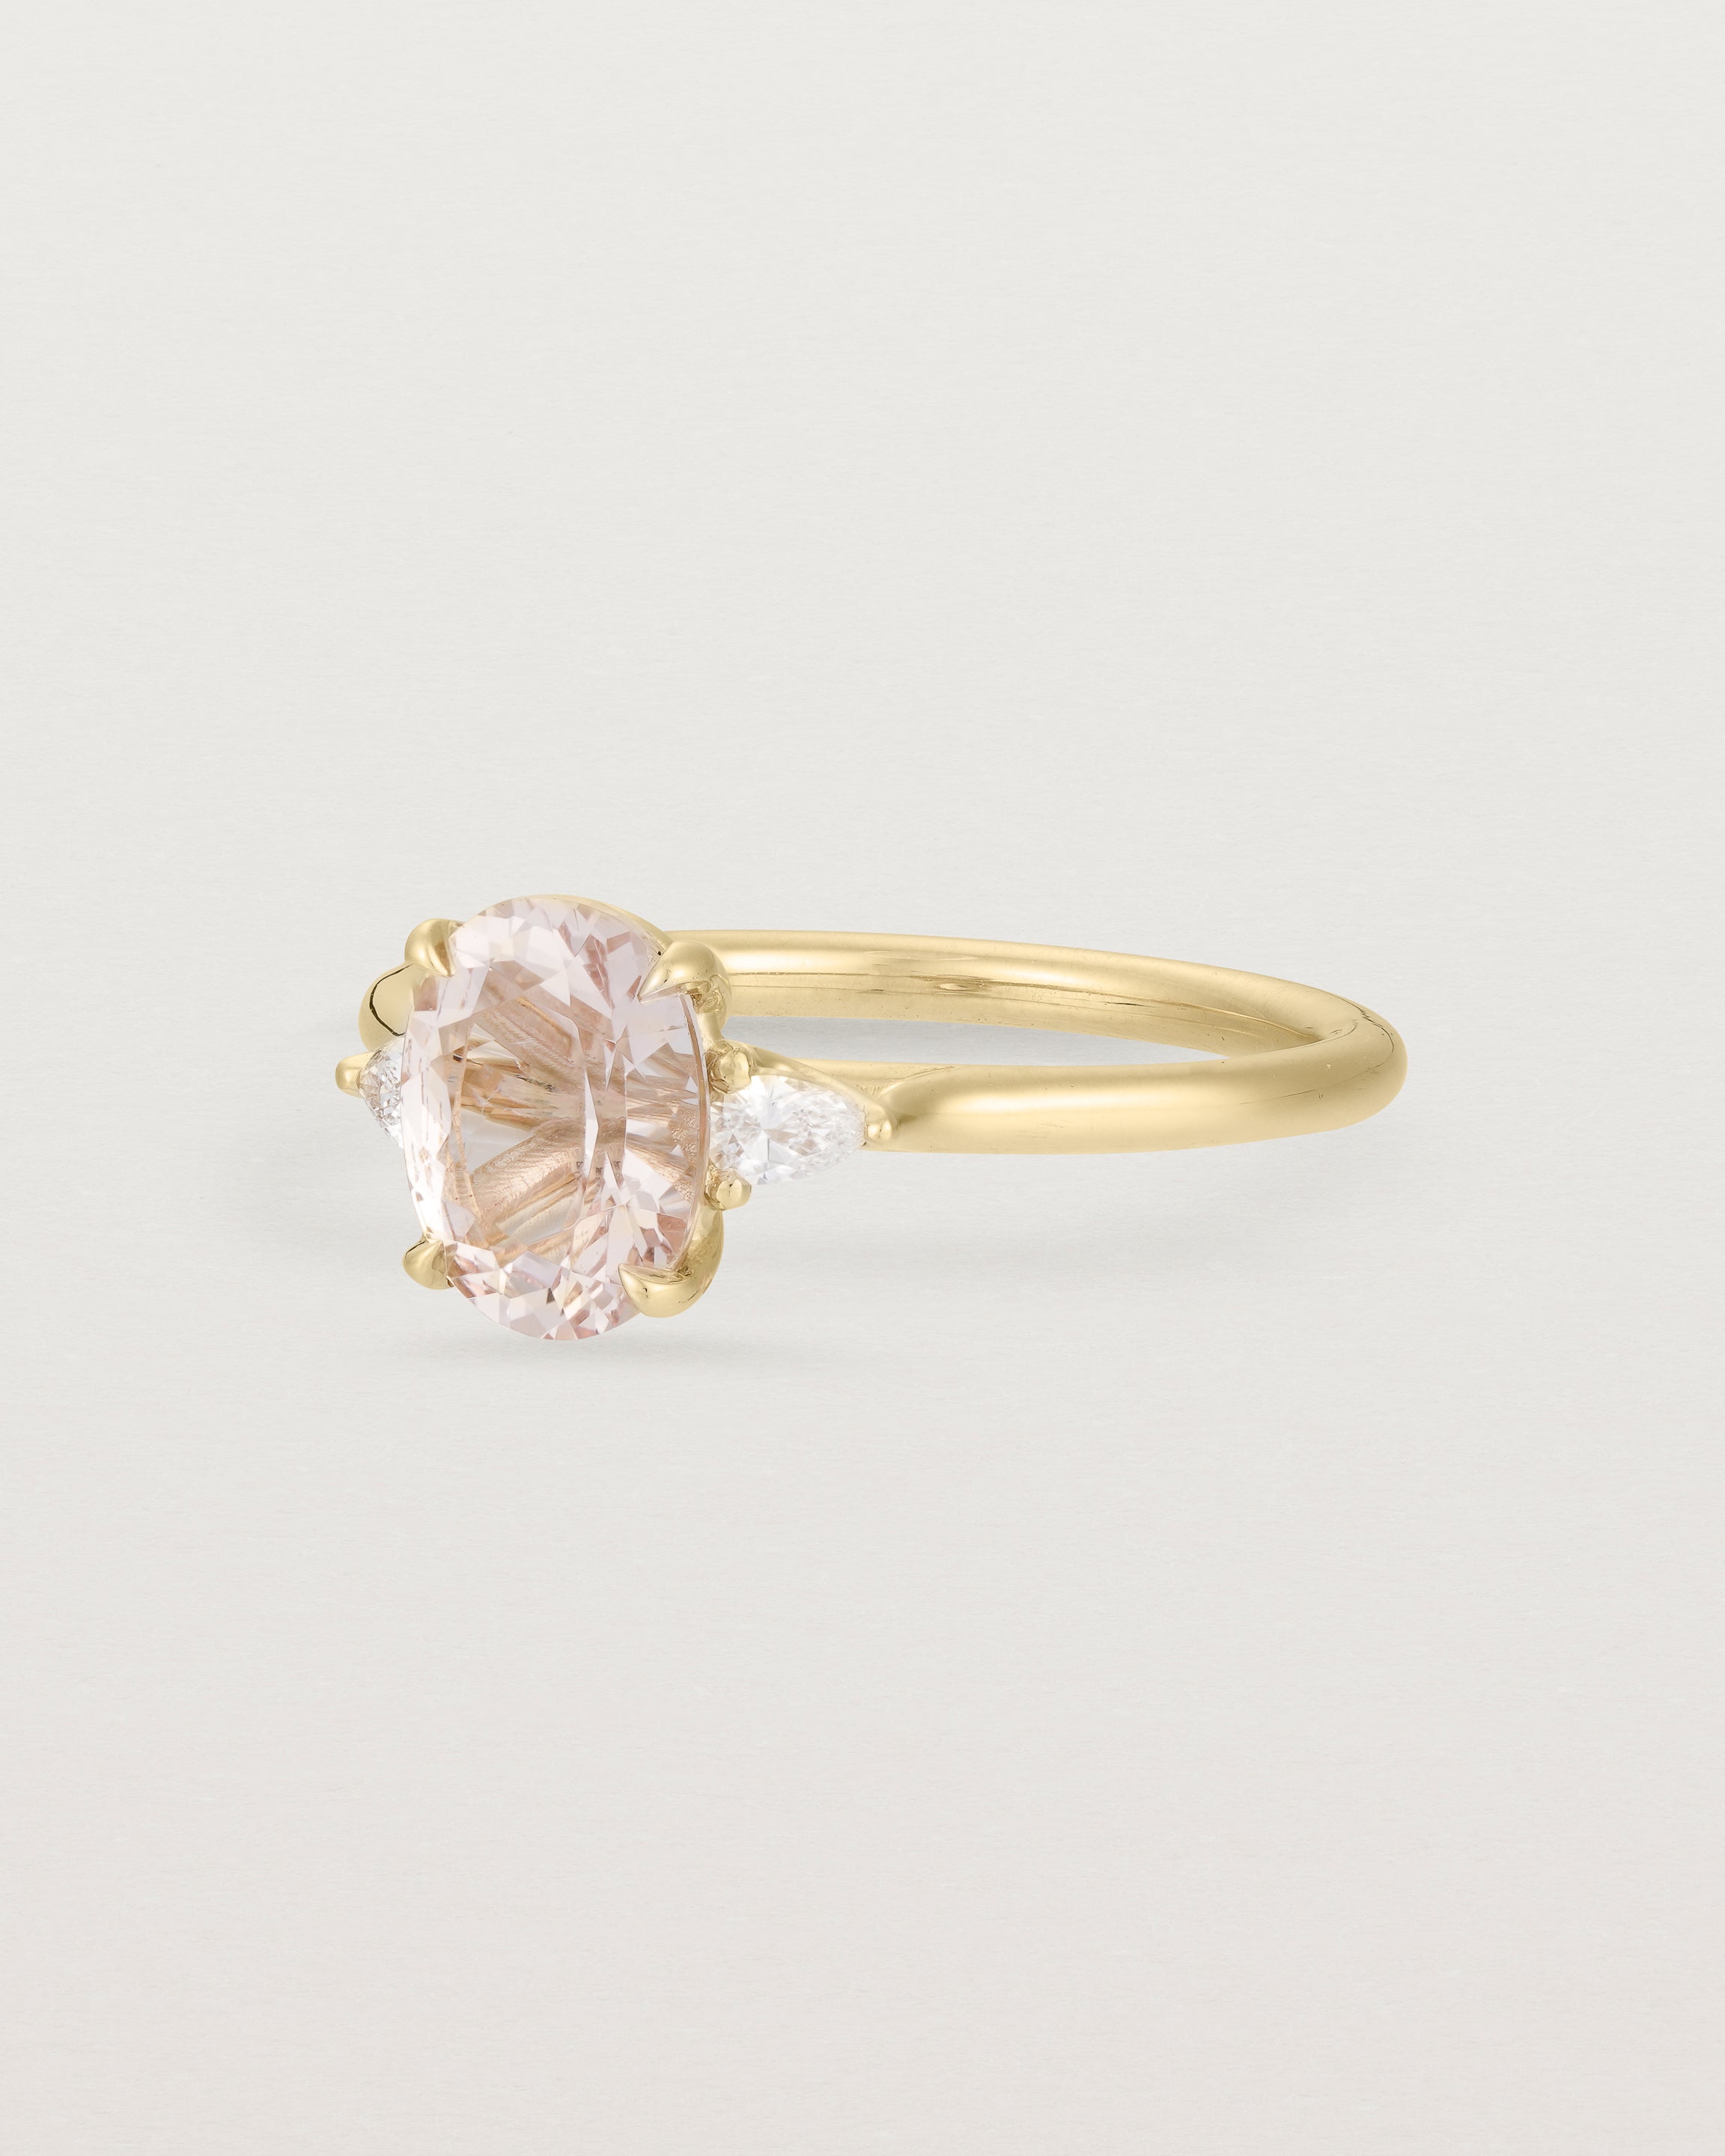 The side view of An oval morganite adorned with white diamonds either side, featuring a sweeping setting and crafted in yellow gold